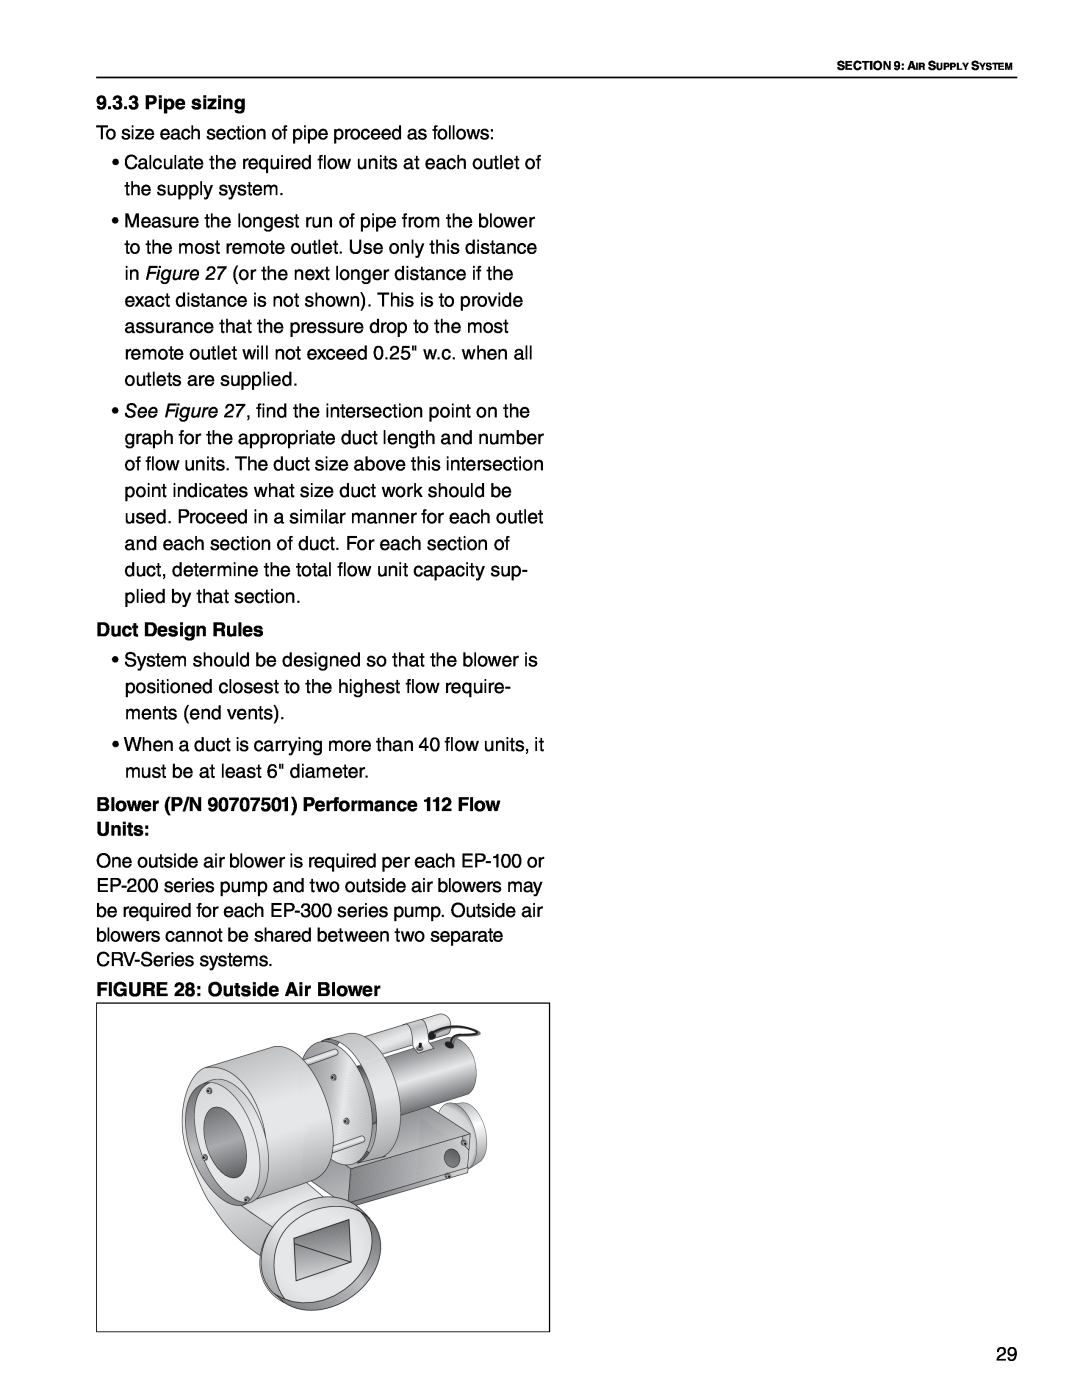 Roberts Gorden CRV-B-4 Pipe sizing, Duct Design Rules, Blower P/N 90707501 Performance 112 Flow Units, Outside Air Blower 